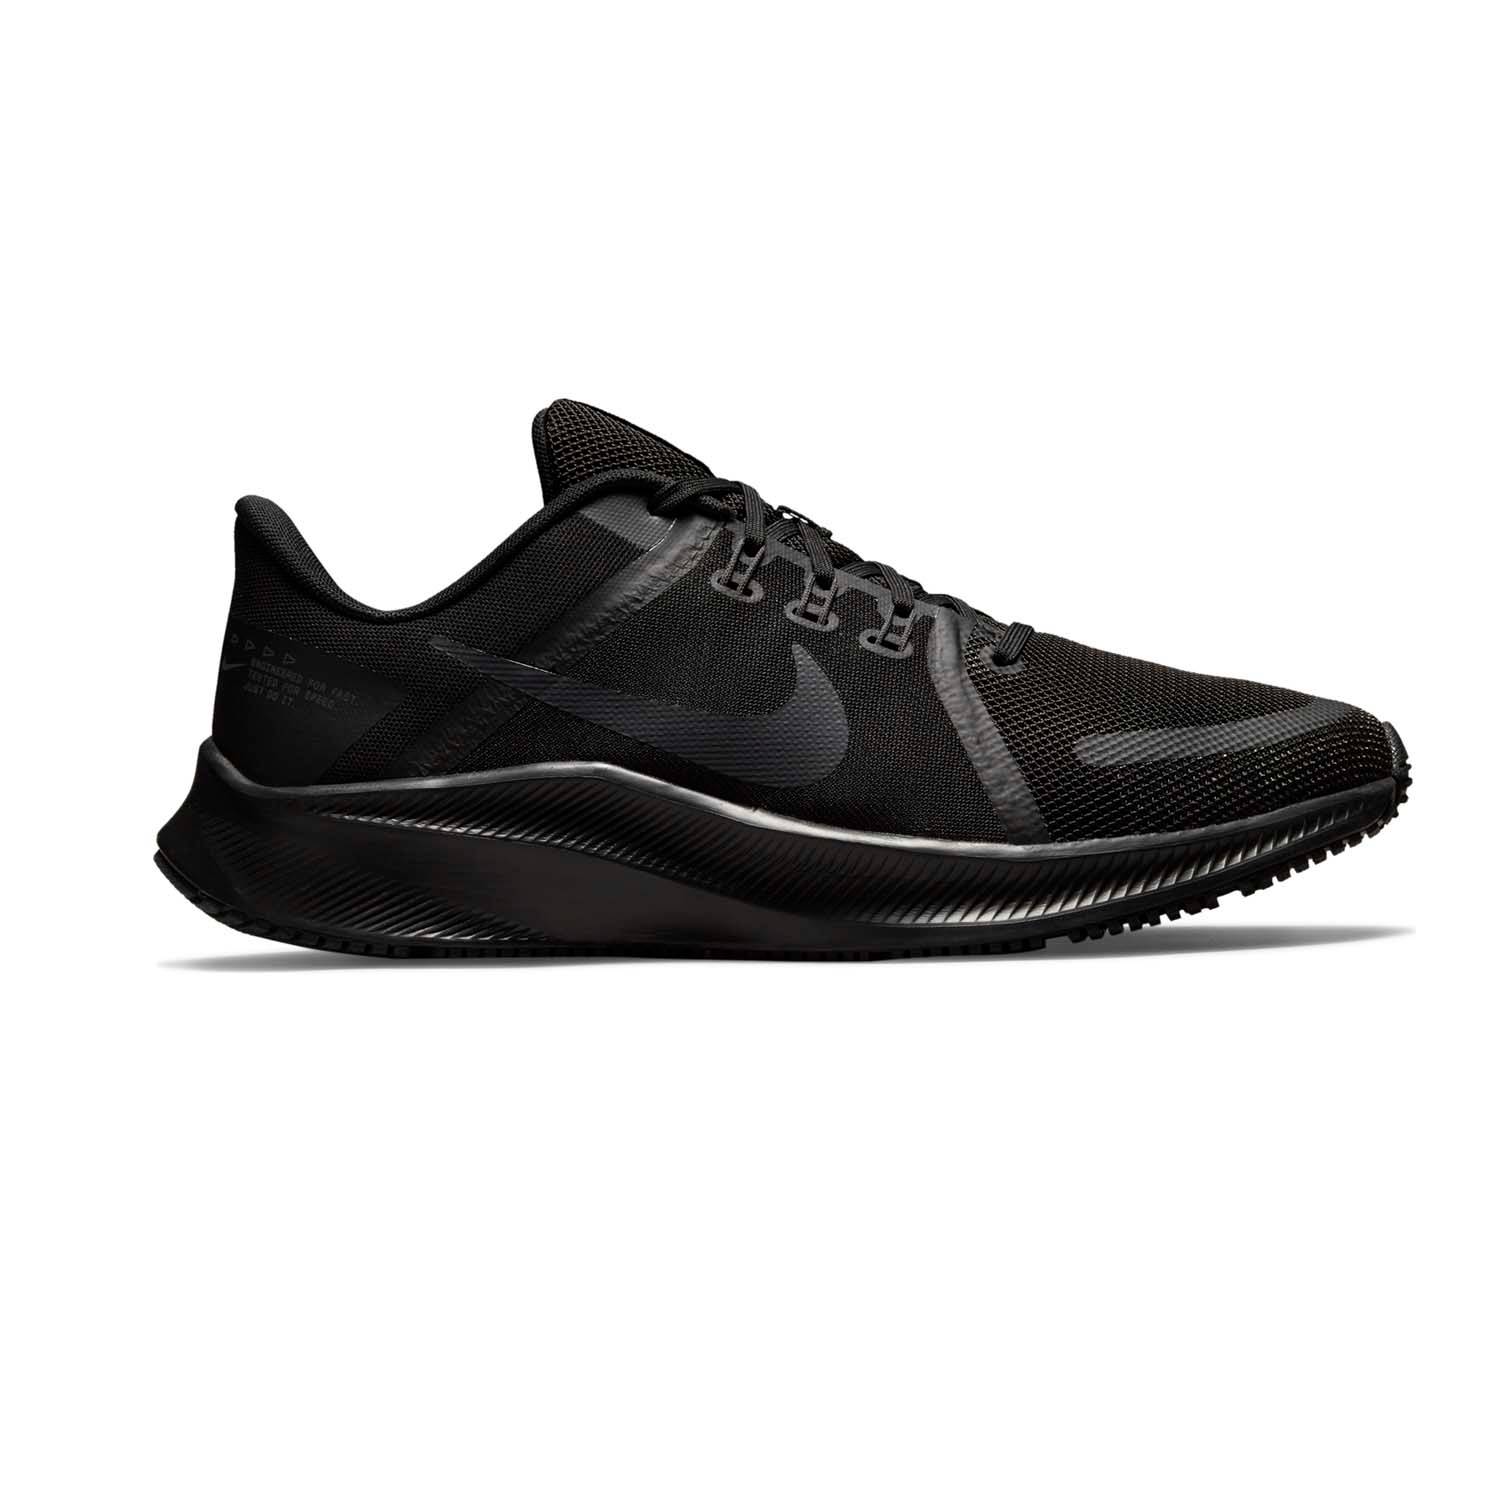 NIKE MEN'S QUEST 4 RUNNING SHOES